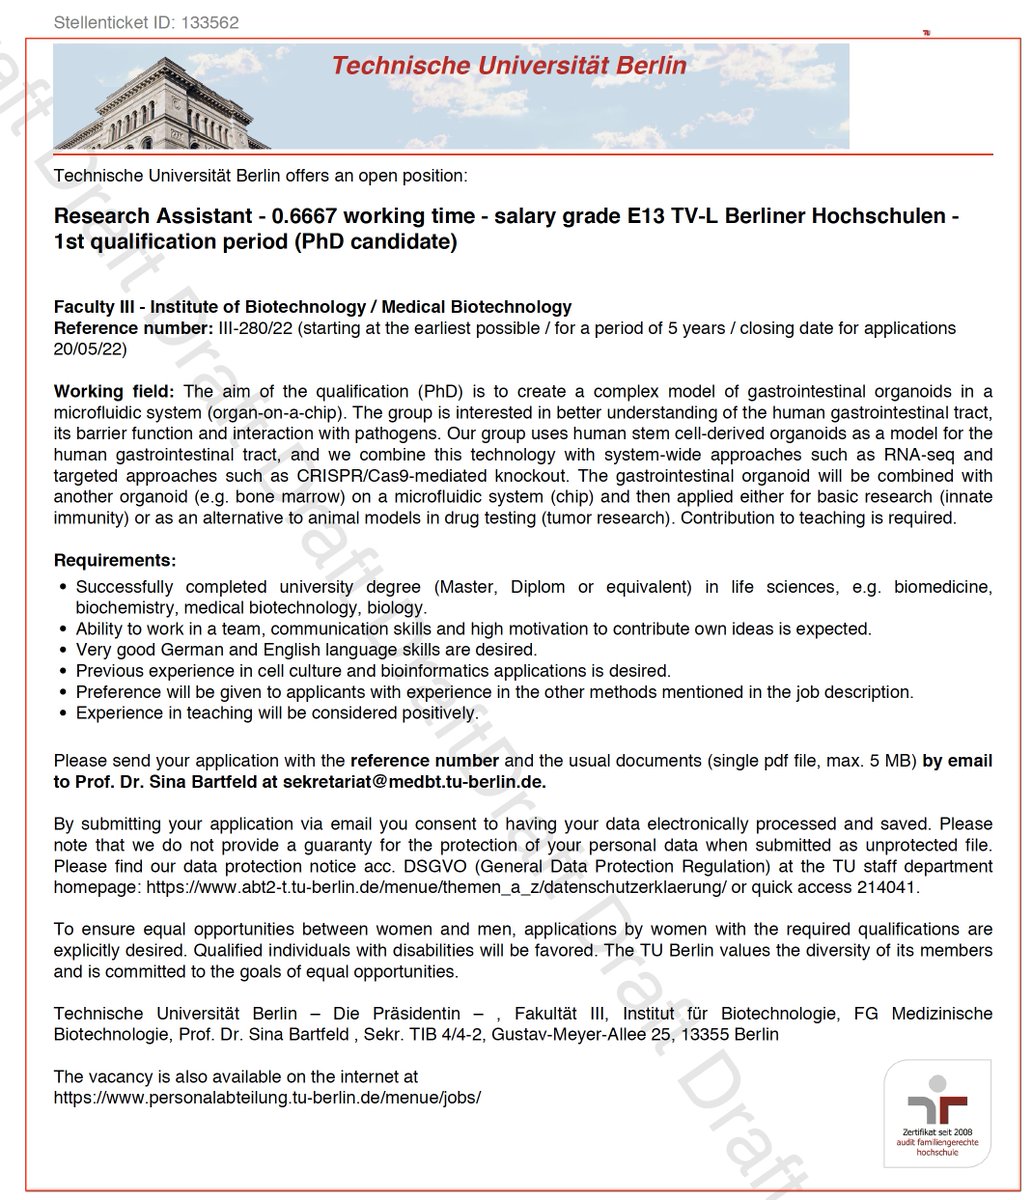 One more PhD student position available!